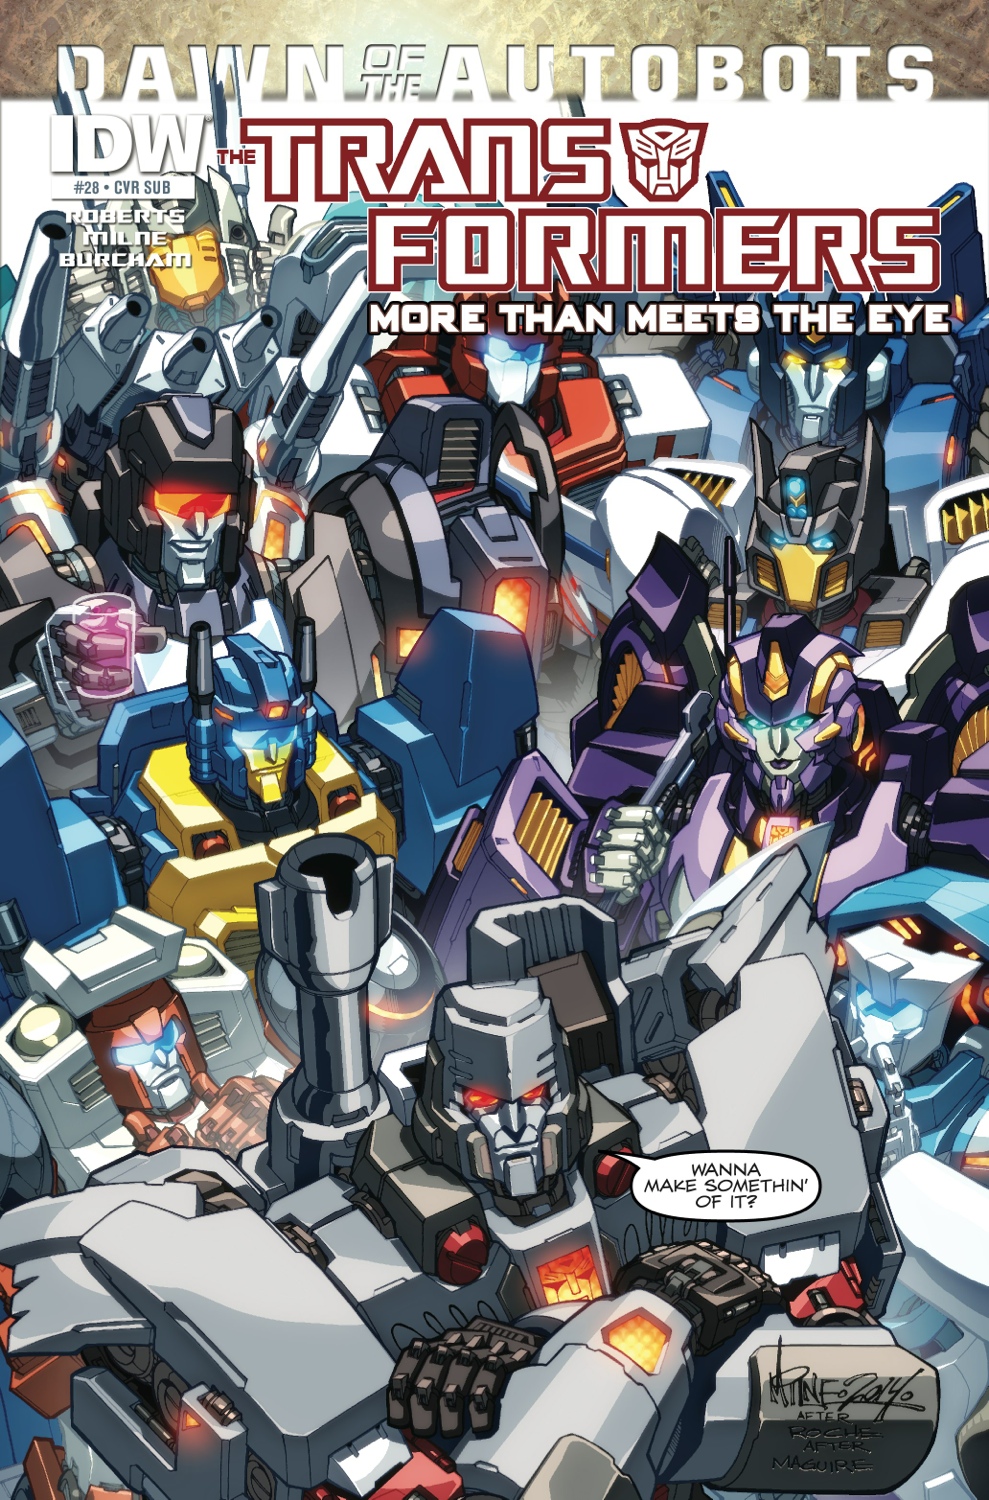 IDW Transformers: More Than Meets The Eye #28 Preview